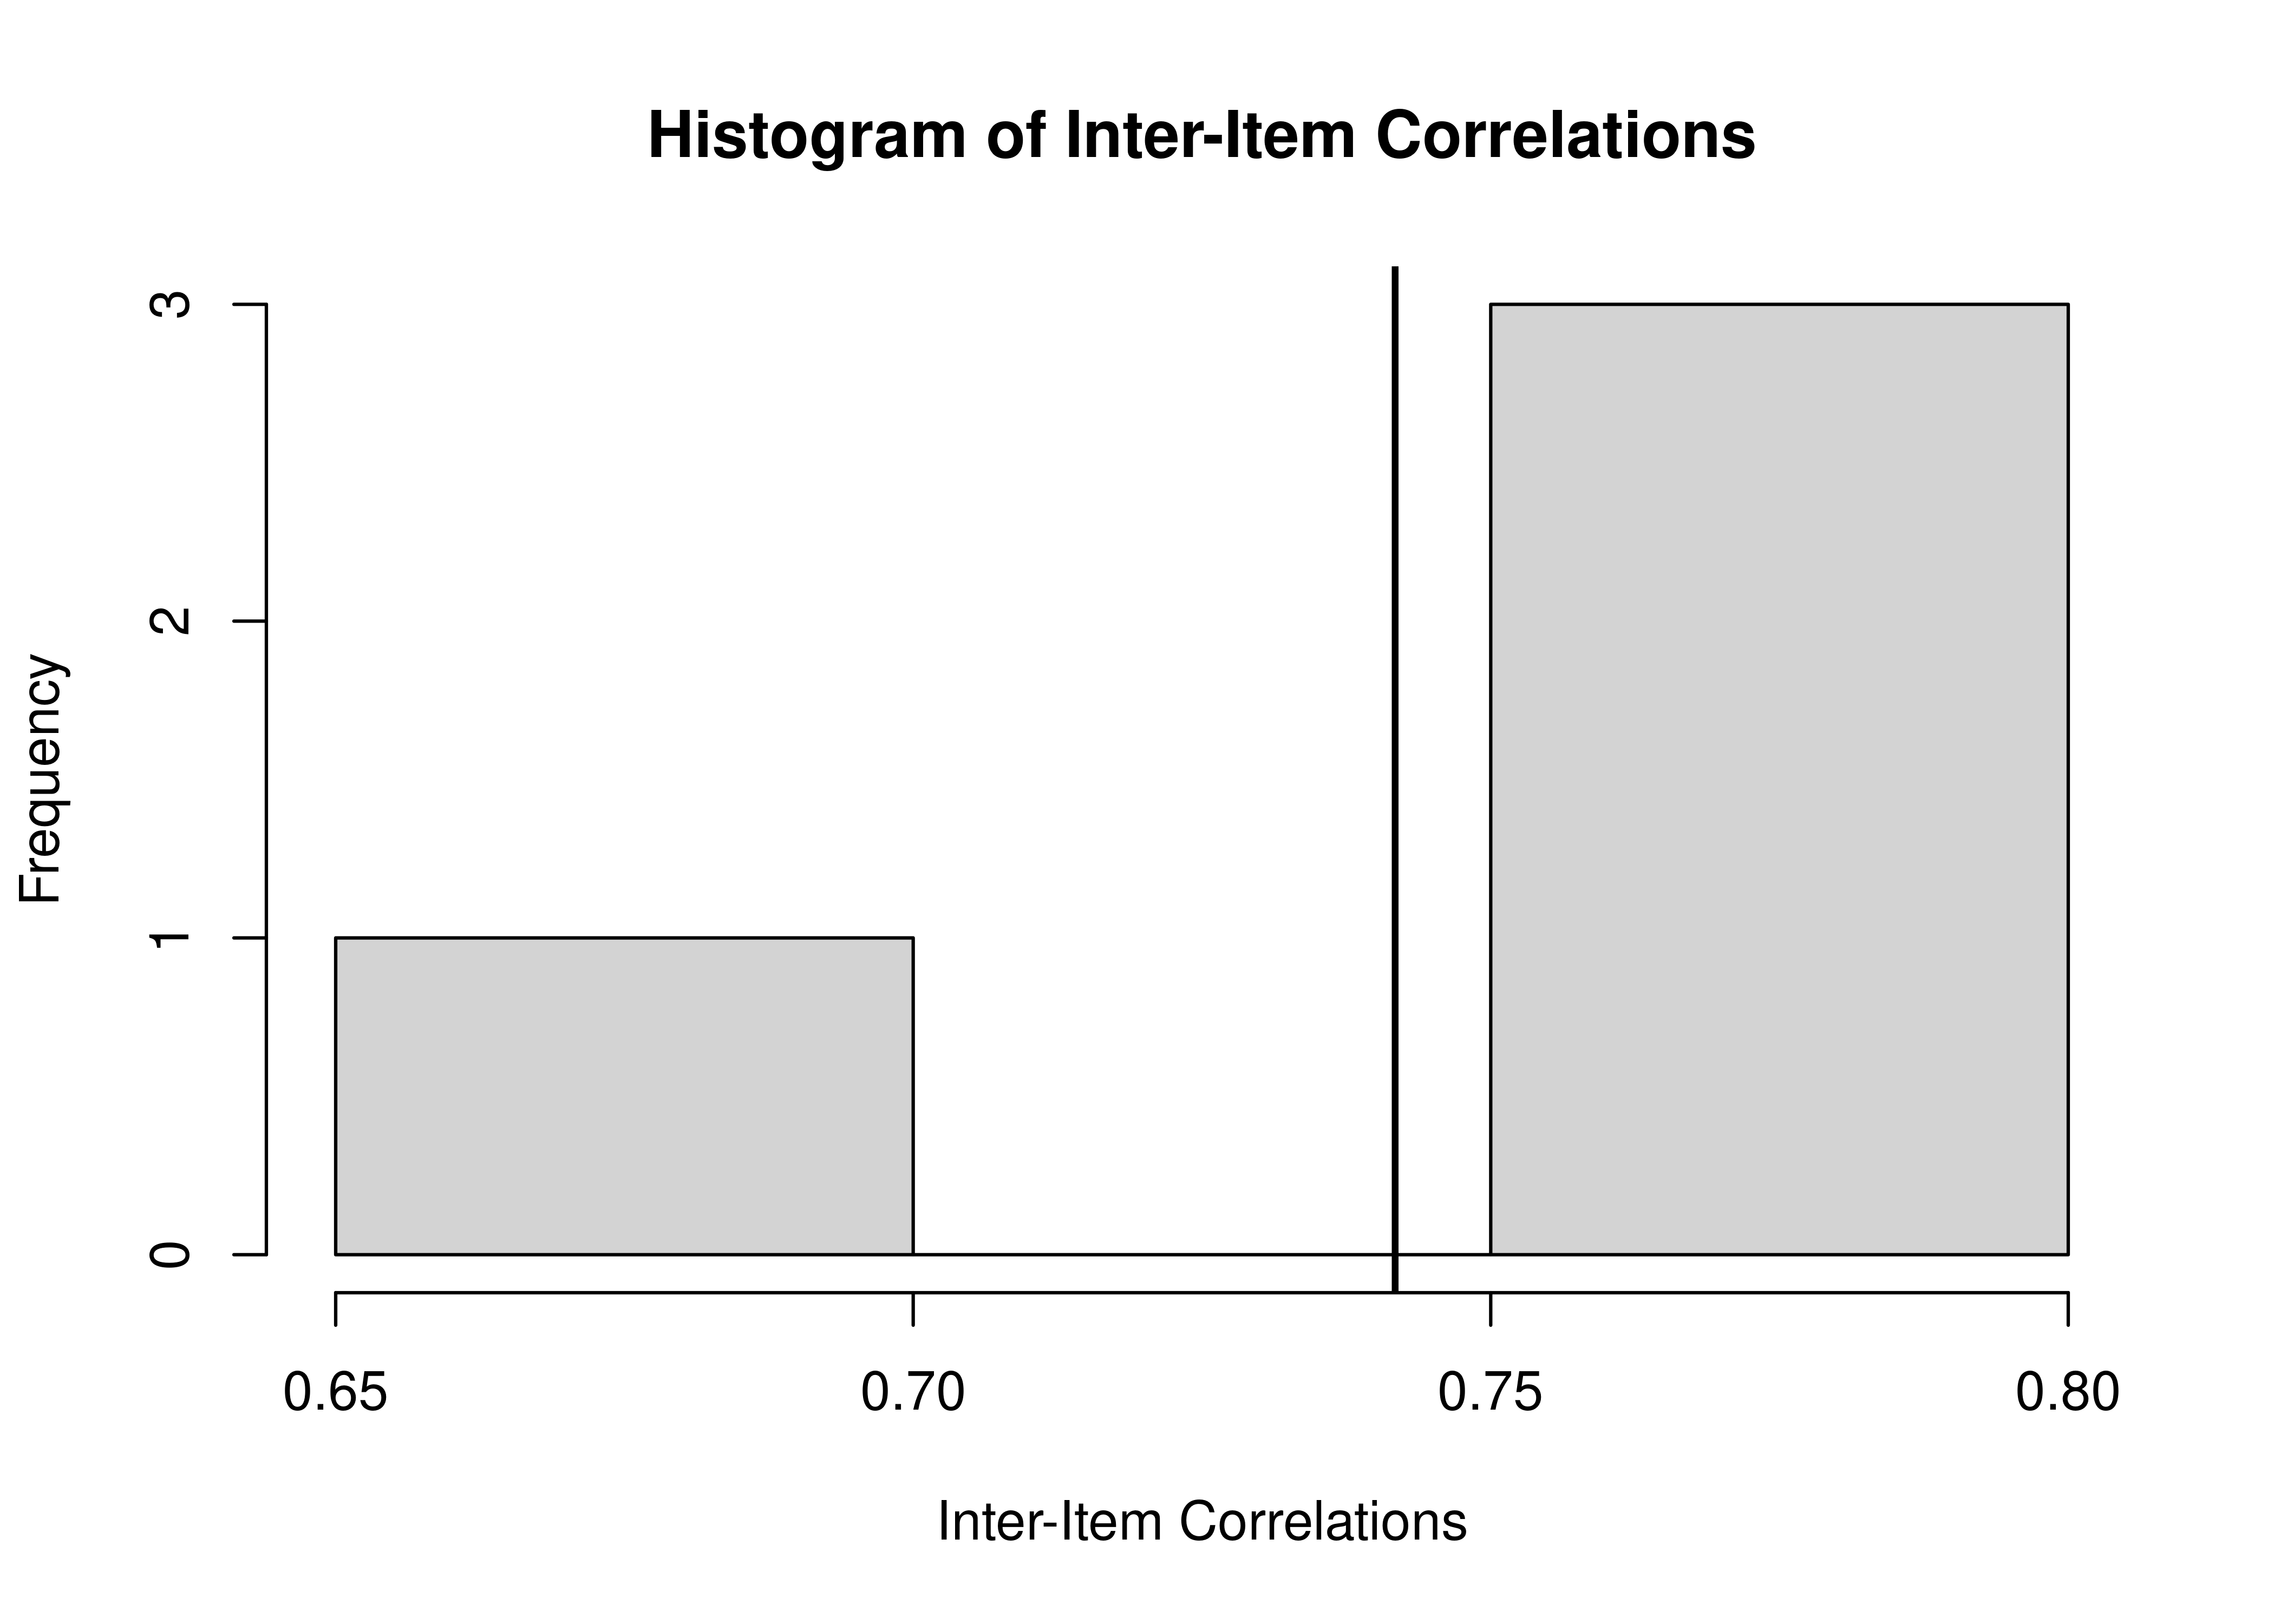 Histogram of Inter-Item Correlations. The vertical black line reflects the mean inter-item correlation.